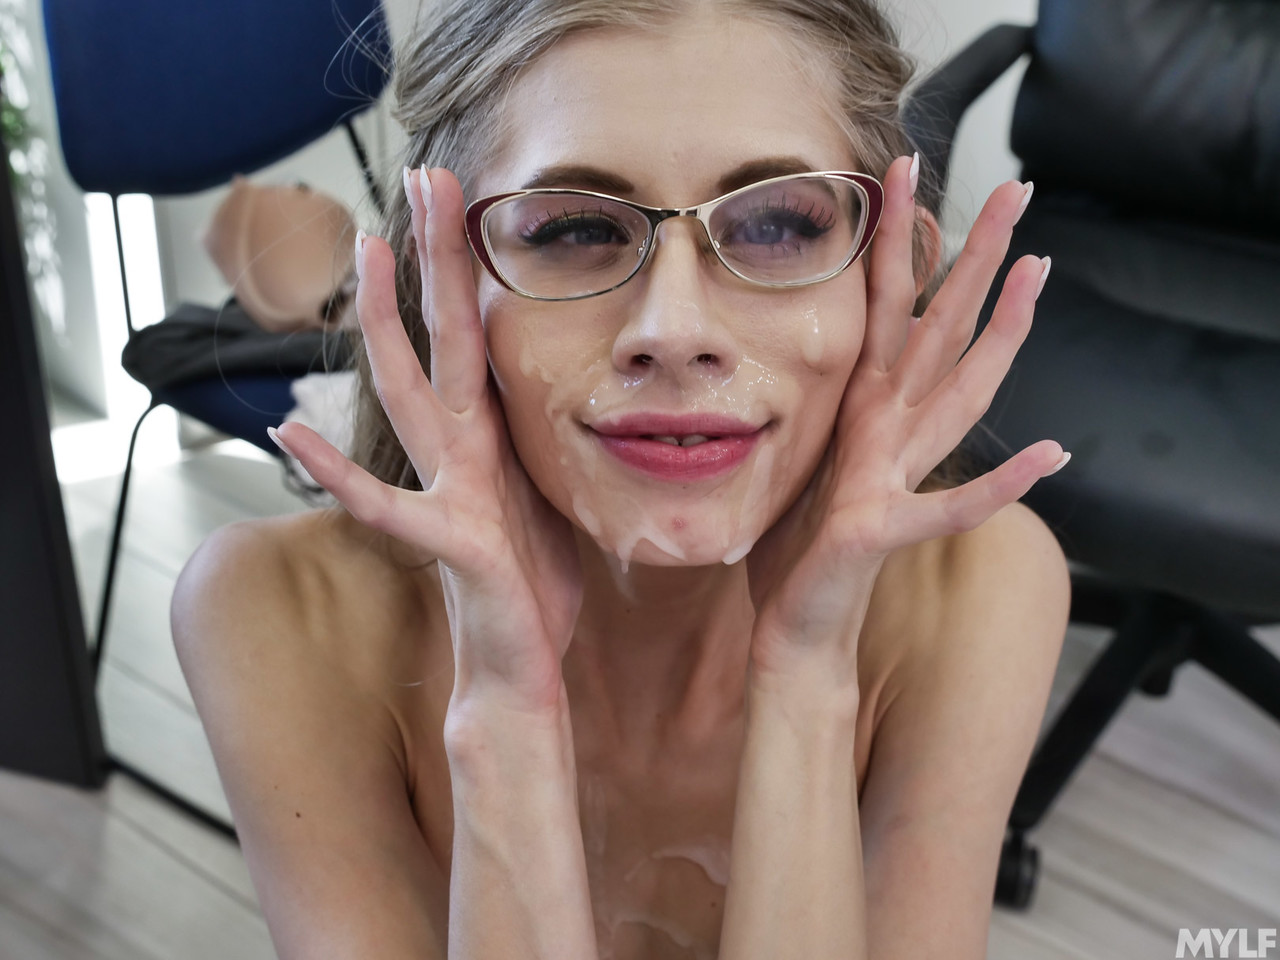 Secretary Kyaa Chimera shows her long legs and gets a facial after office sex foto porno #422605943 | MYLF Pics, Kyaa Chimera, Mike Mancini, Facial, porno móvil